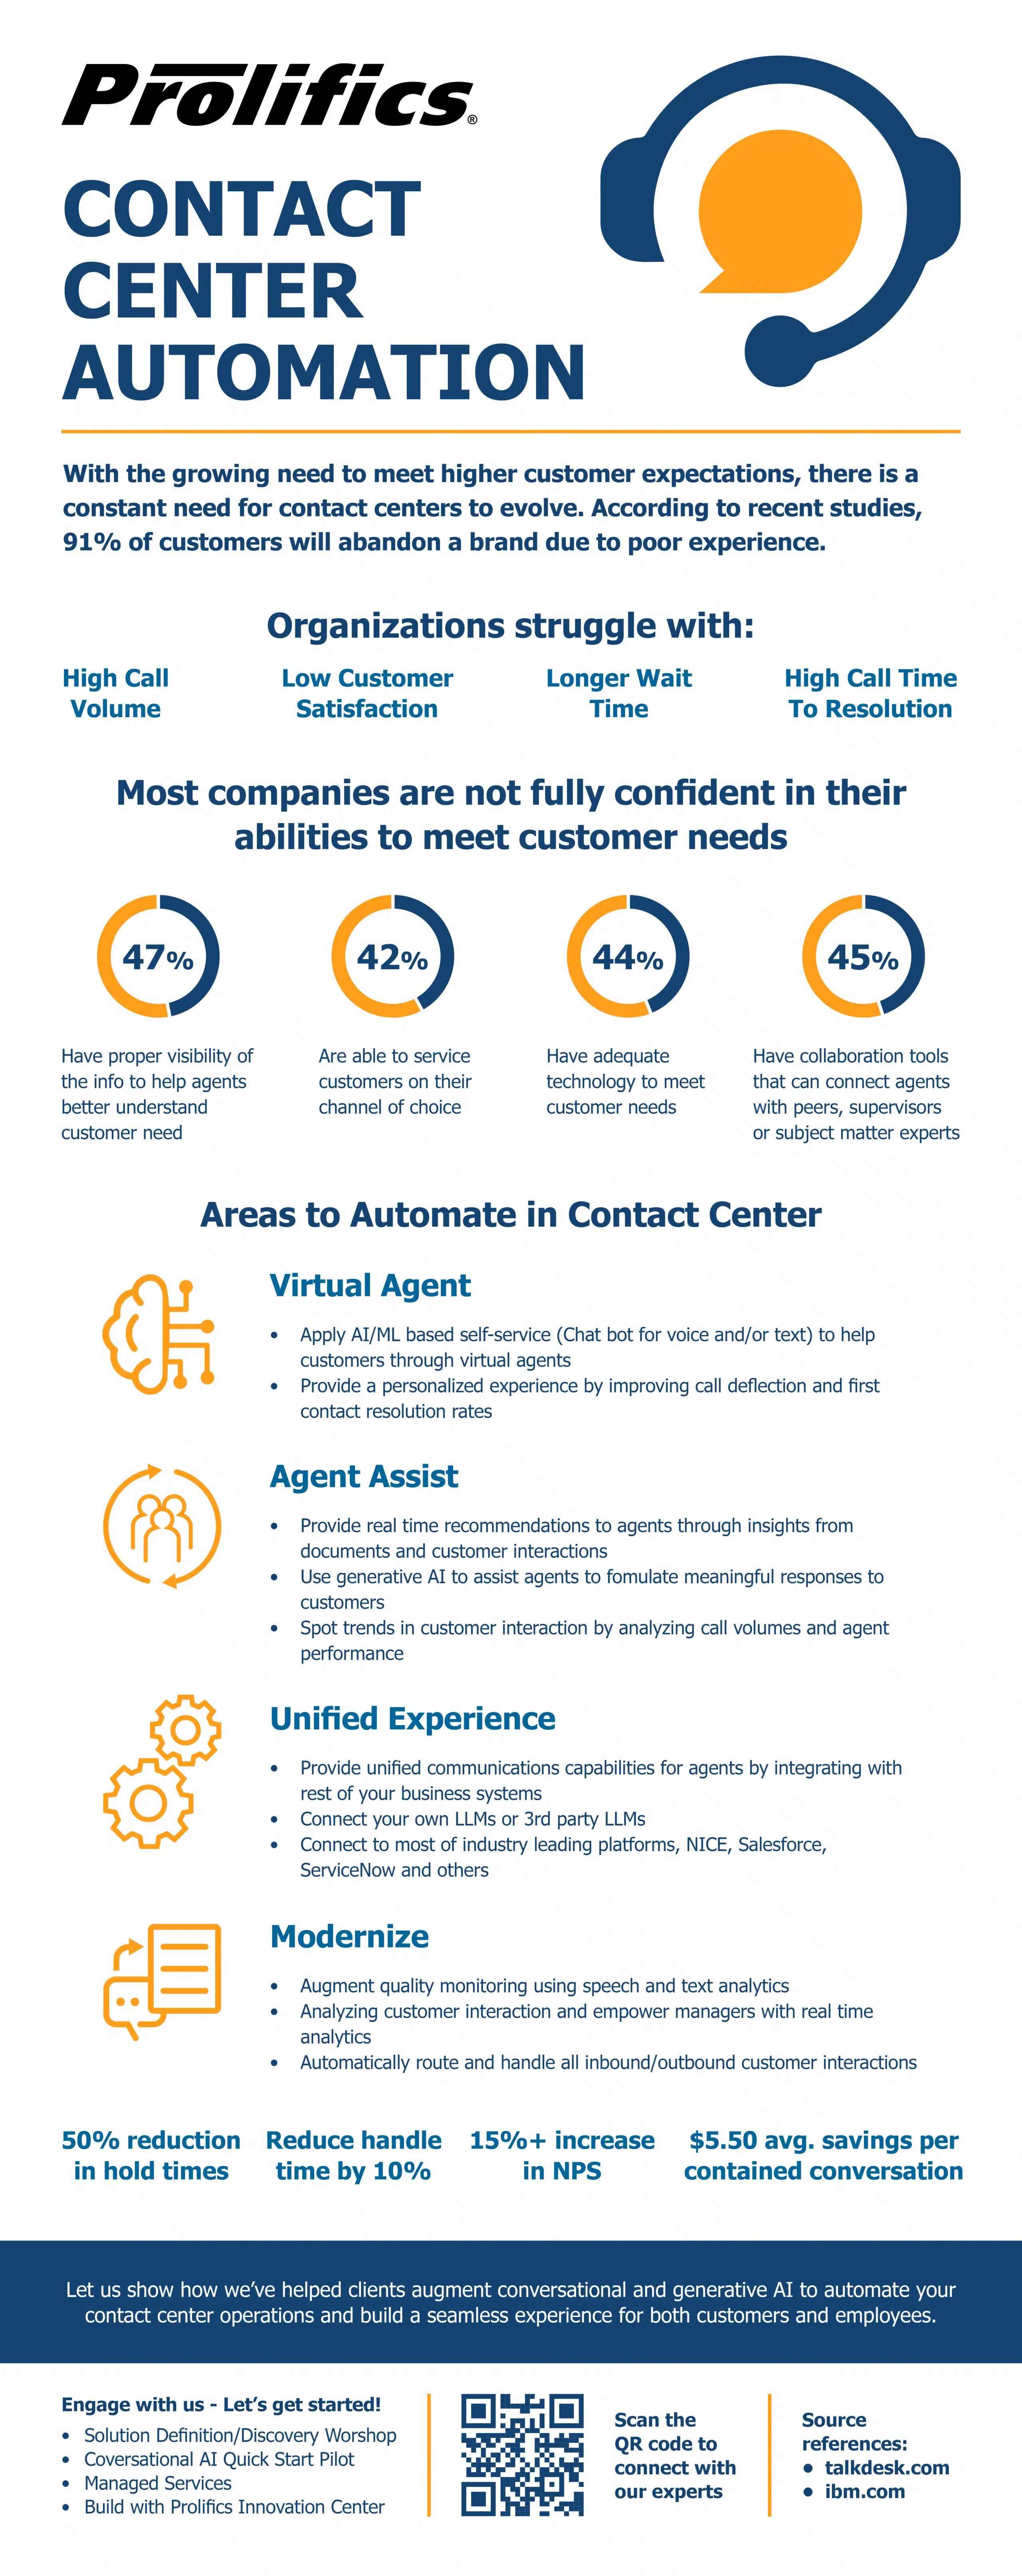 Why Should Your Contact Center Evolve?